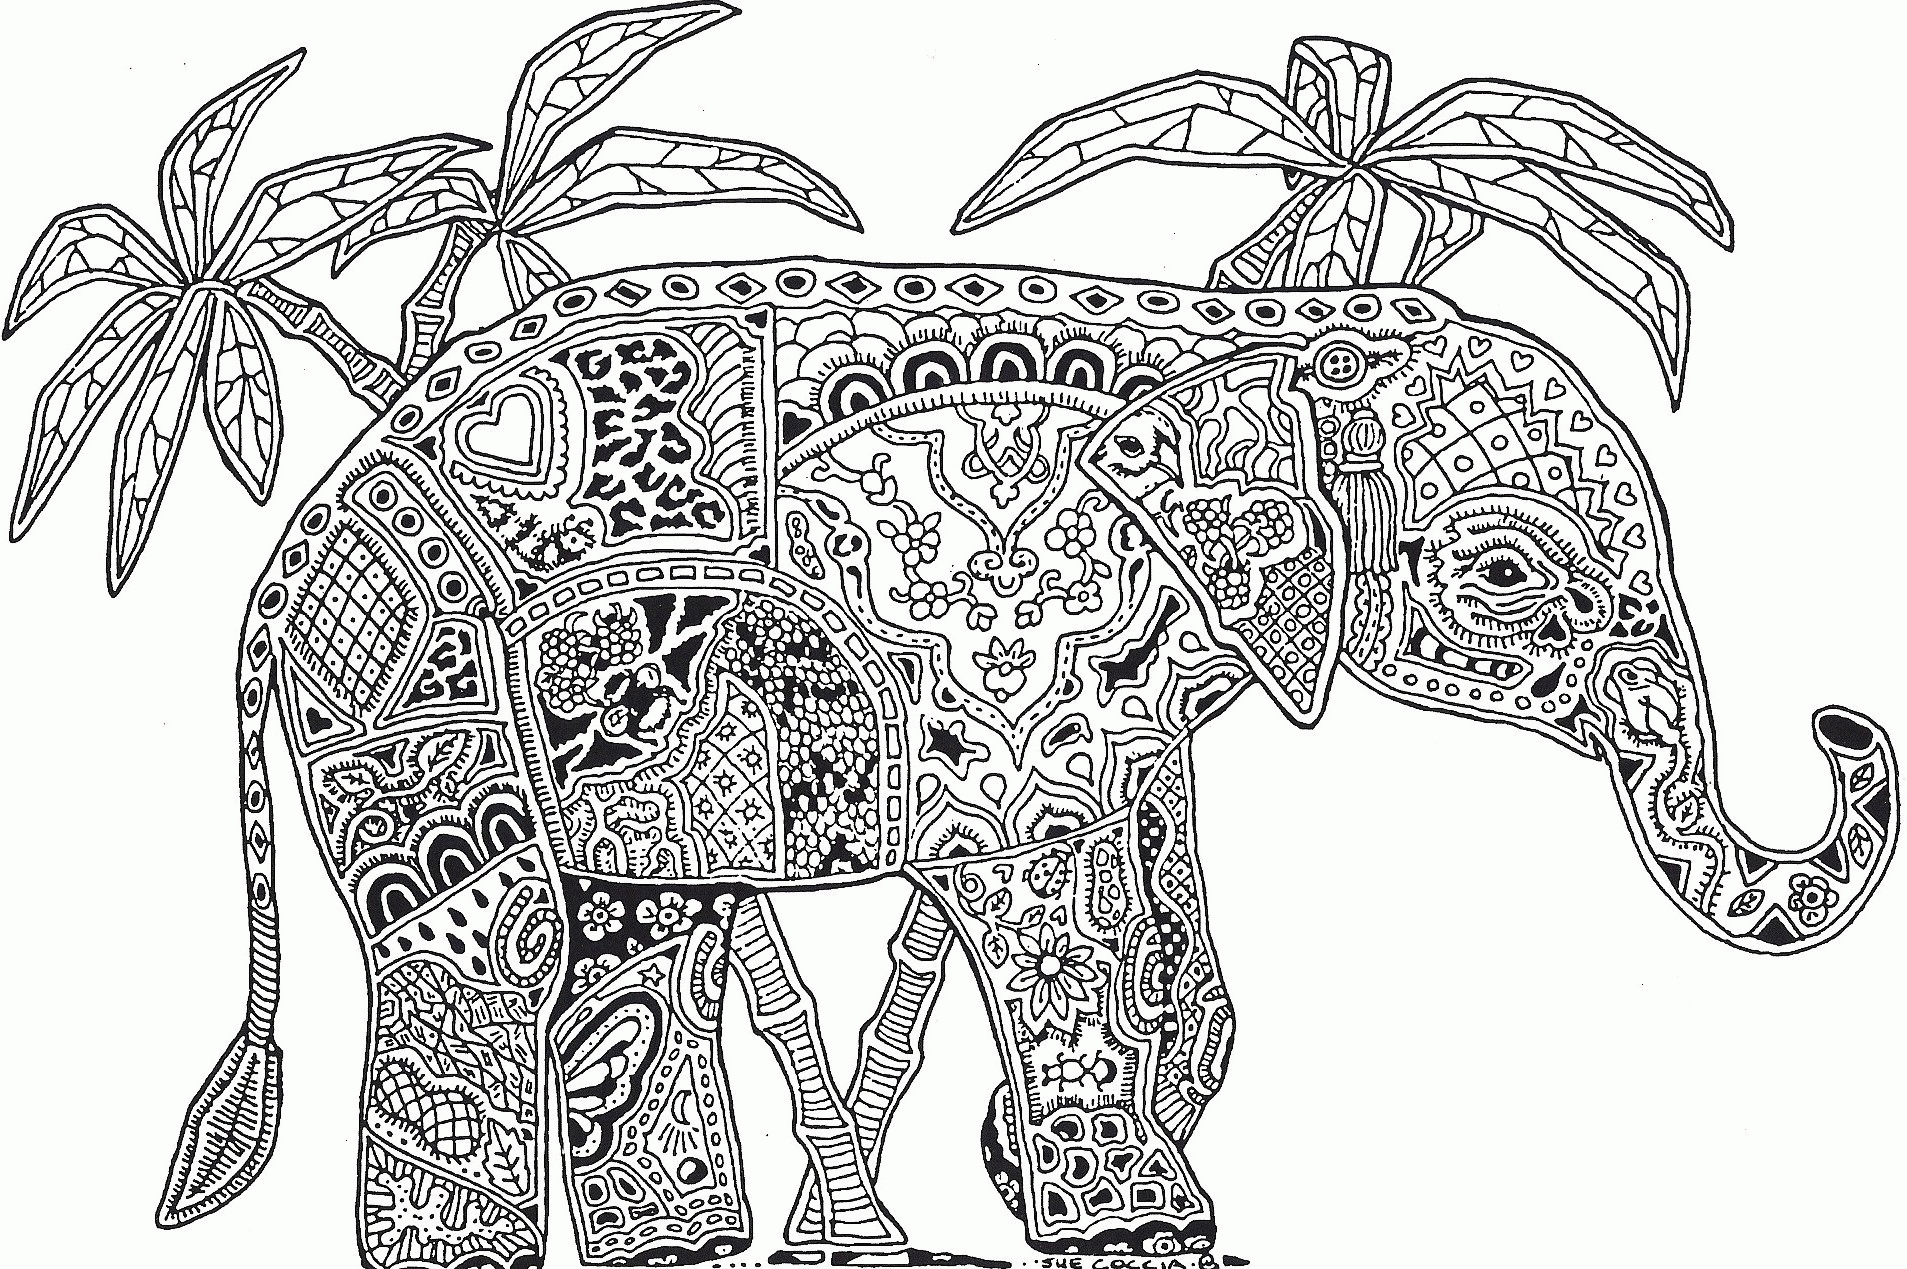 Difficult coloring pages for adults to download and print for free